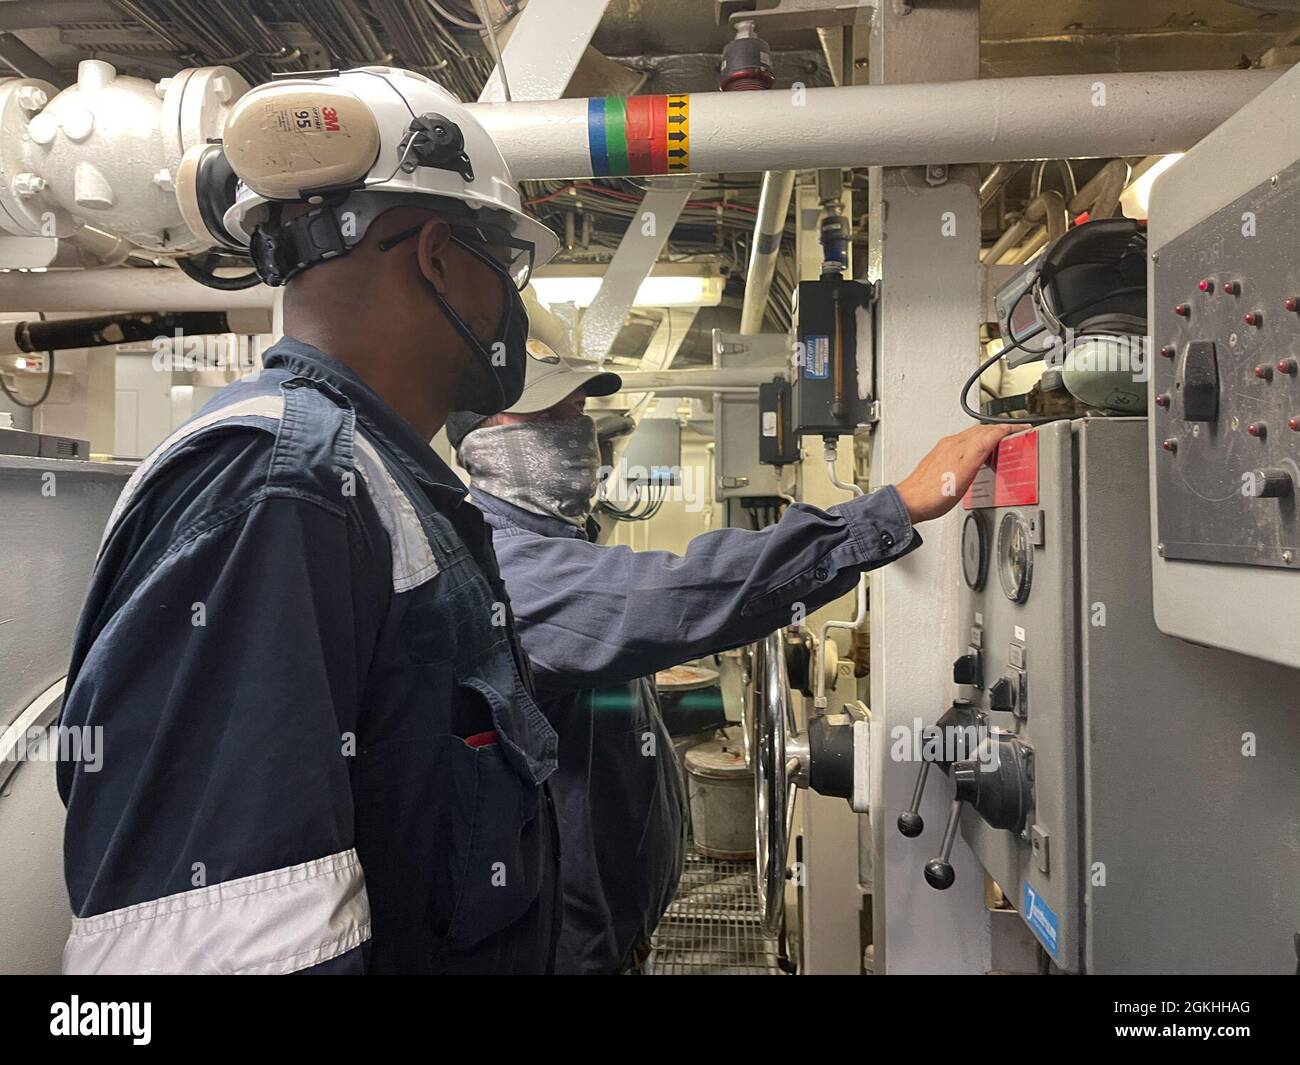 Coast Guard Marine Inspector Adrian Hill and a SEACOR Eagle crew member inspect the engine room onboard the SEACOR Eagle in Houma, Louisiana, April 23, 2021. The crew and vessel was inspected by Coast Guard marine inspectors for readiness and approval to be used as an asset for the SEACOR Power response. Stock Photo